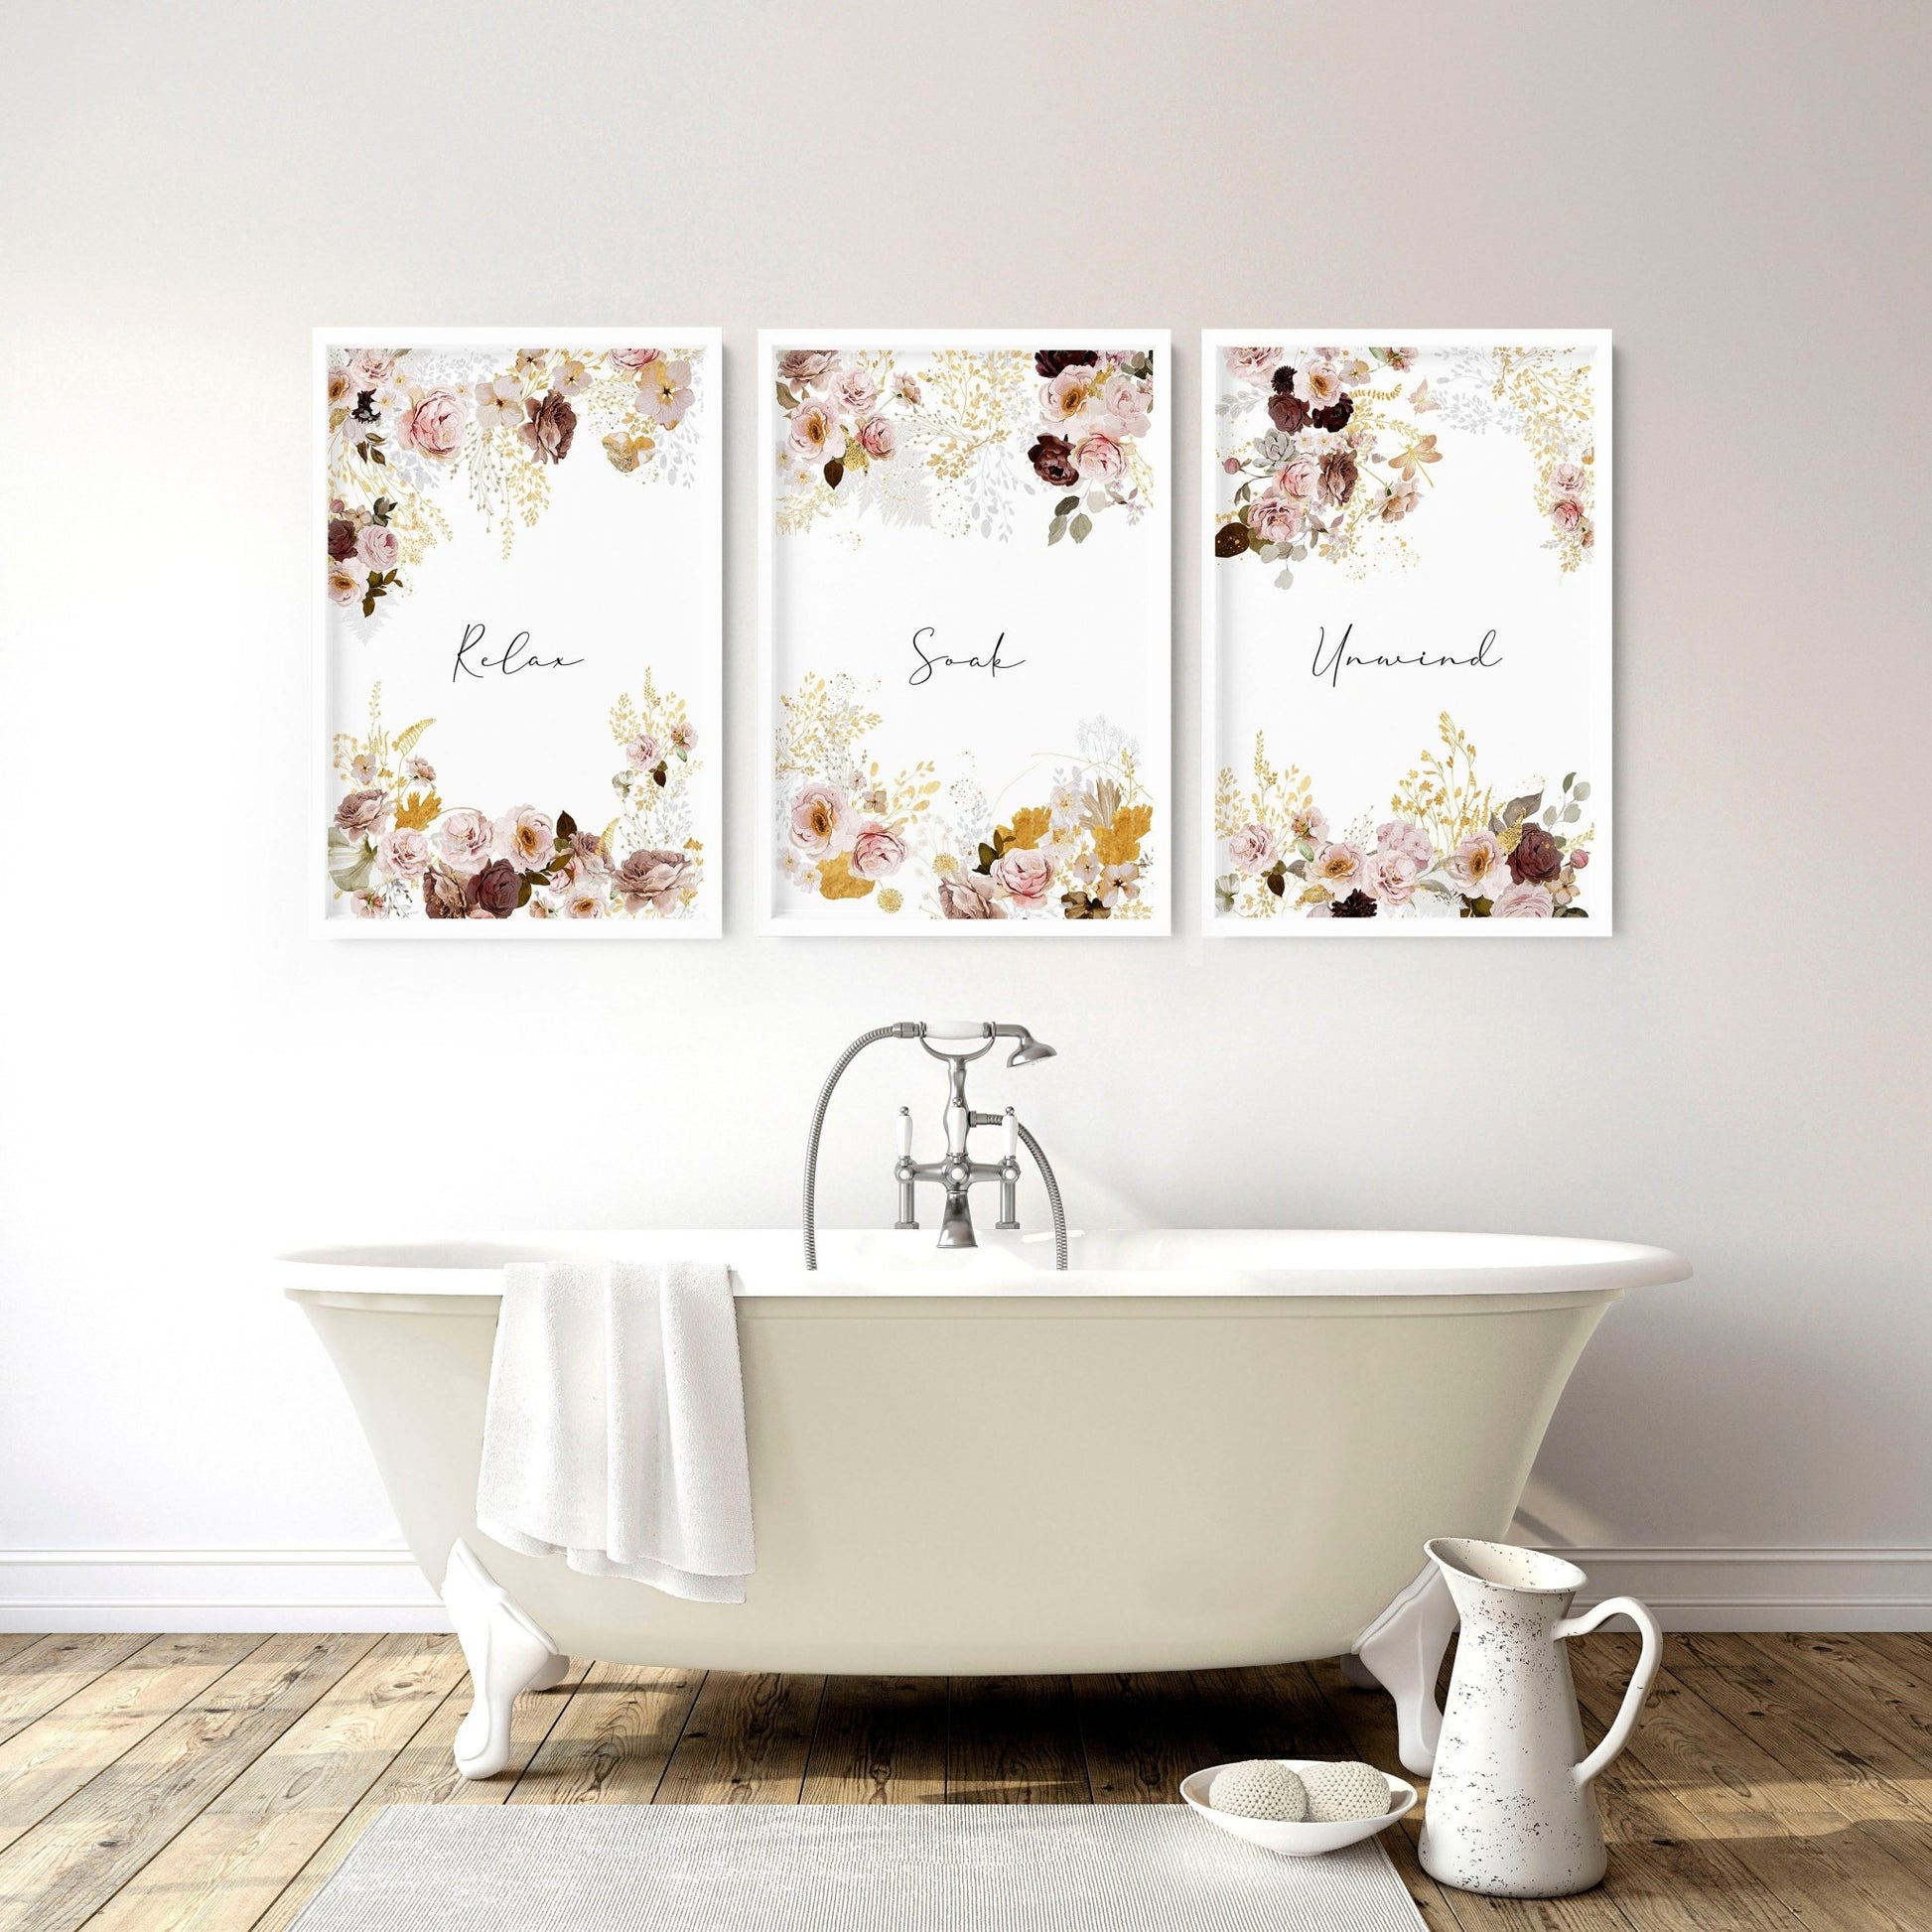 Shabby Chic Wall Hangings | set of 3 bathroom prints - About Wall Art